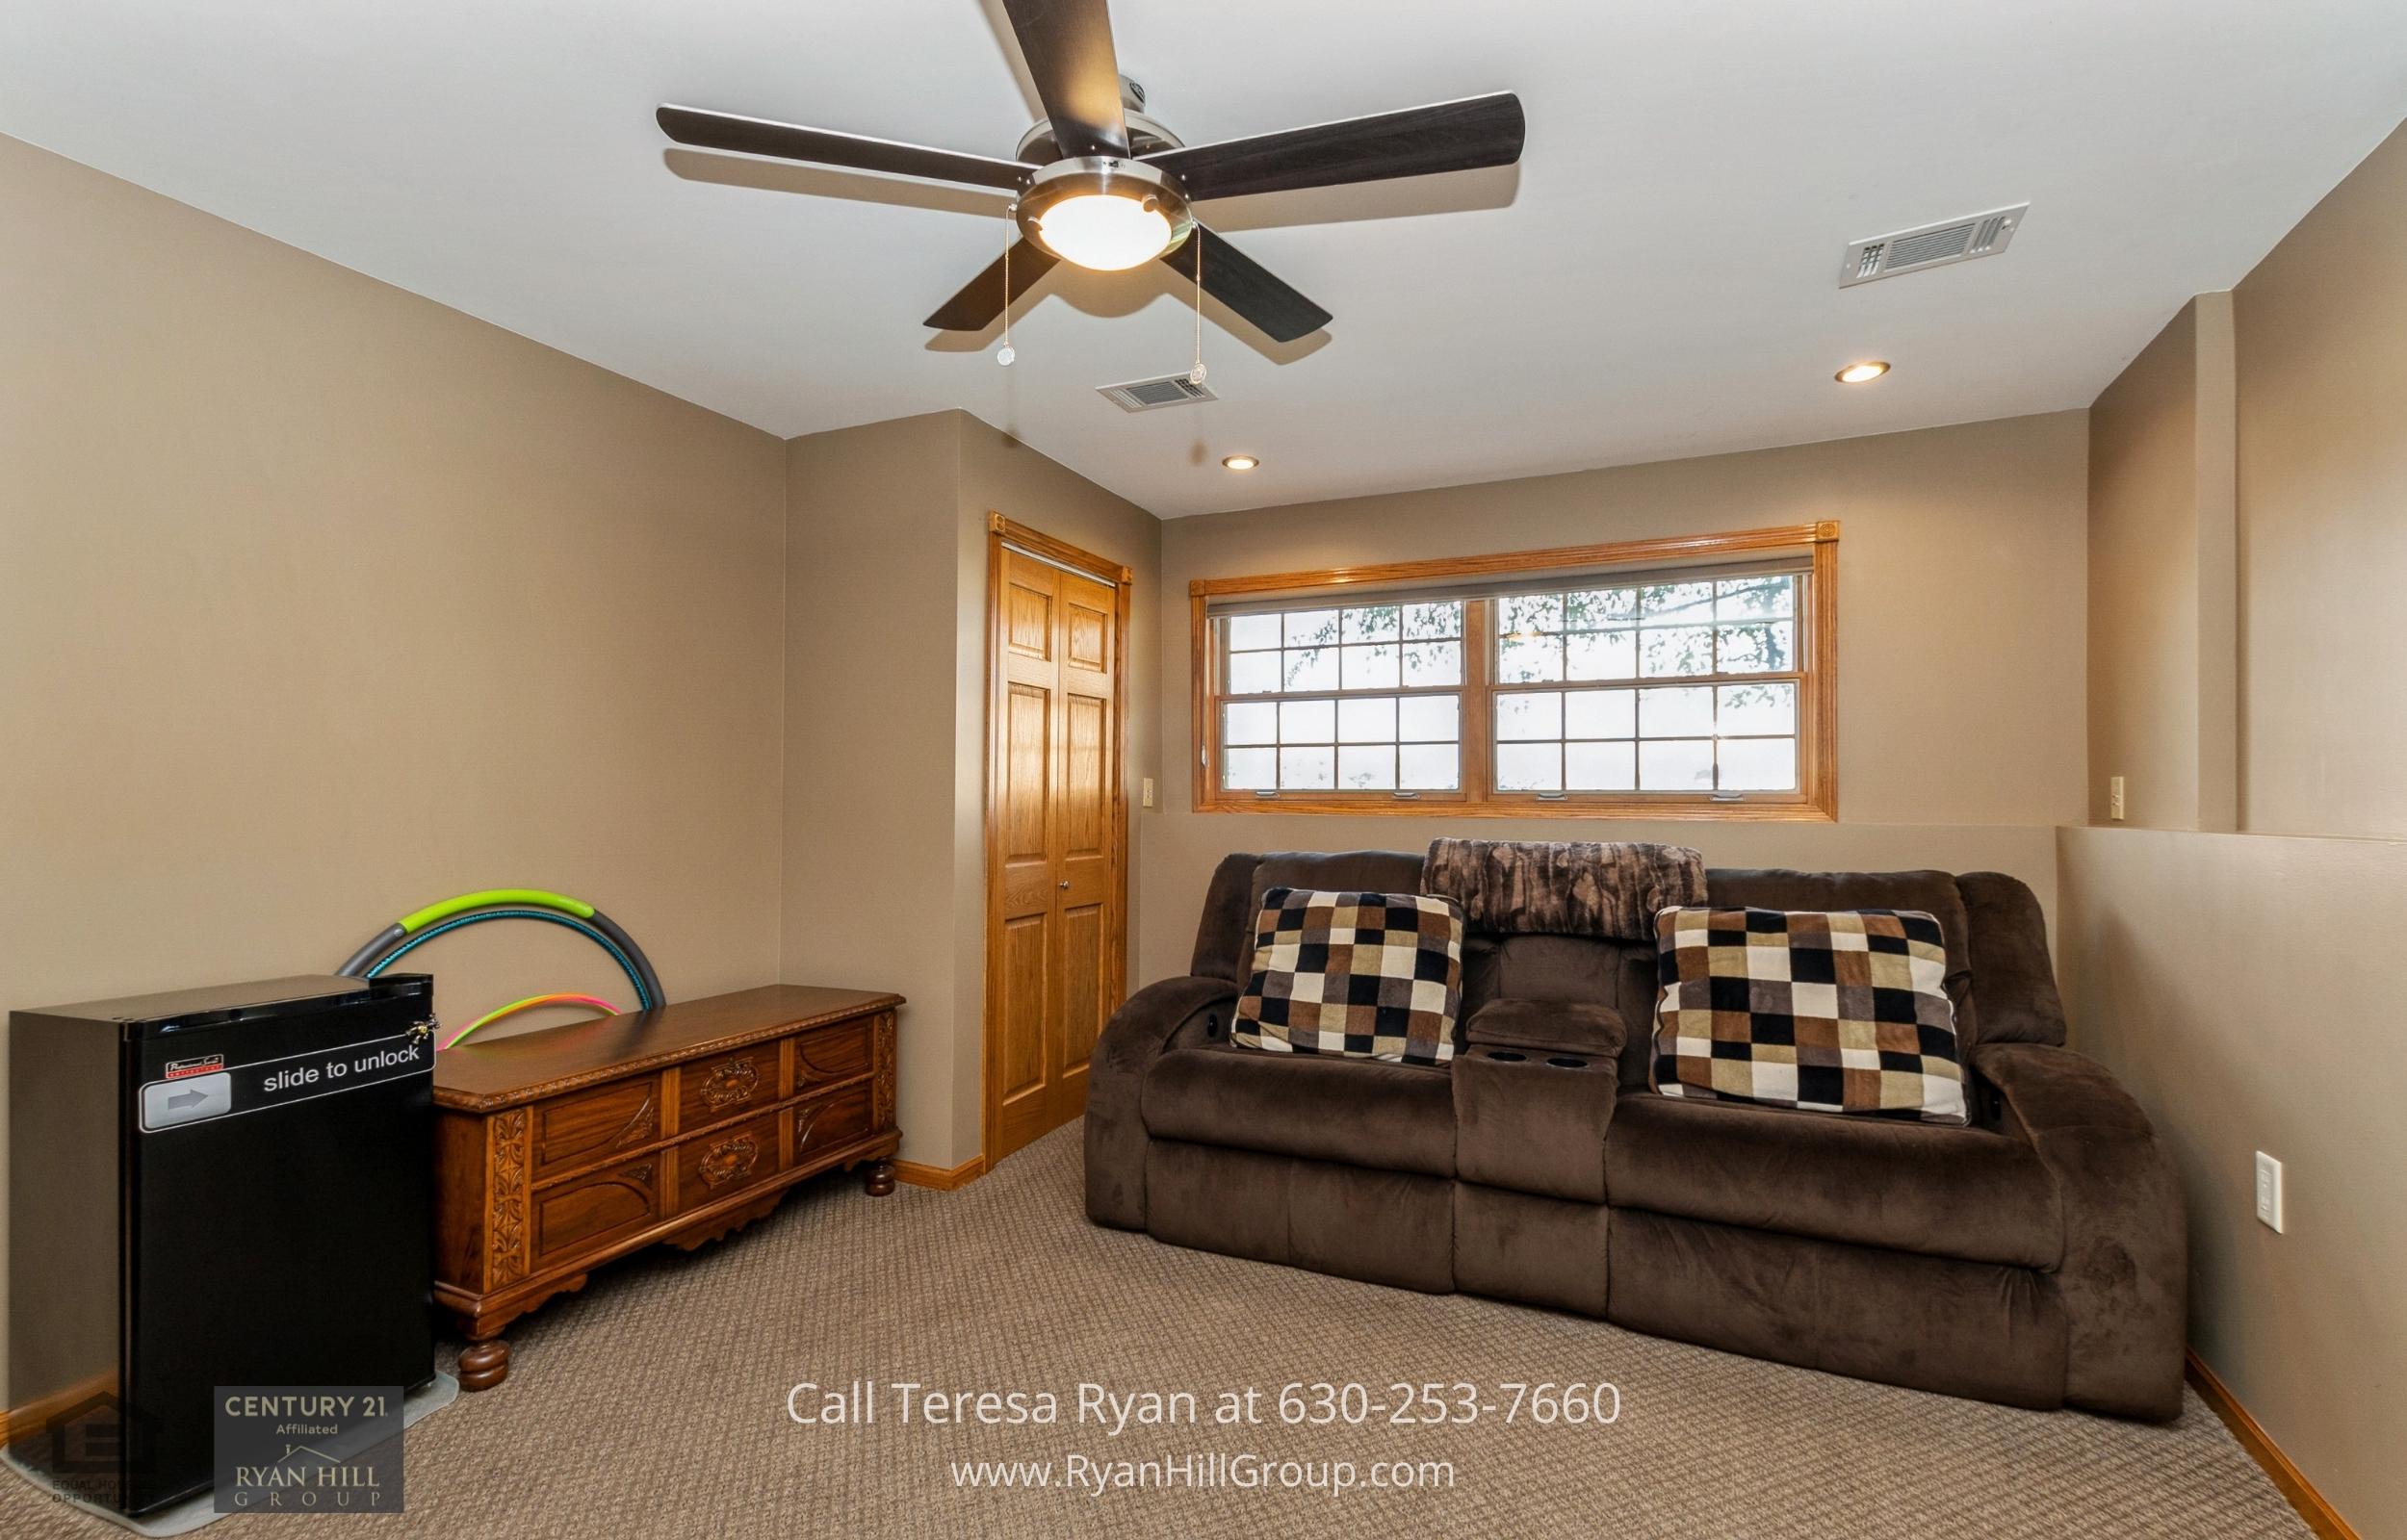 This home offers 2 main level bedrooms and a large lower level bedroom.